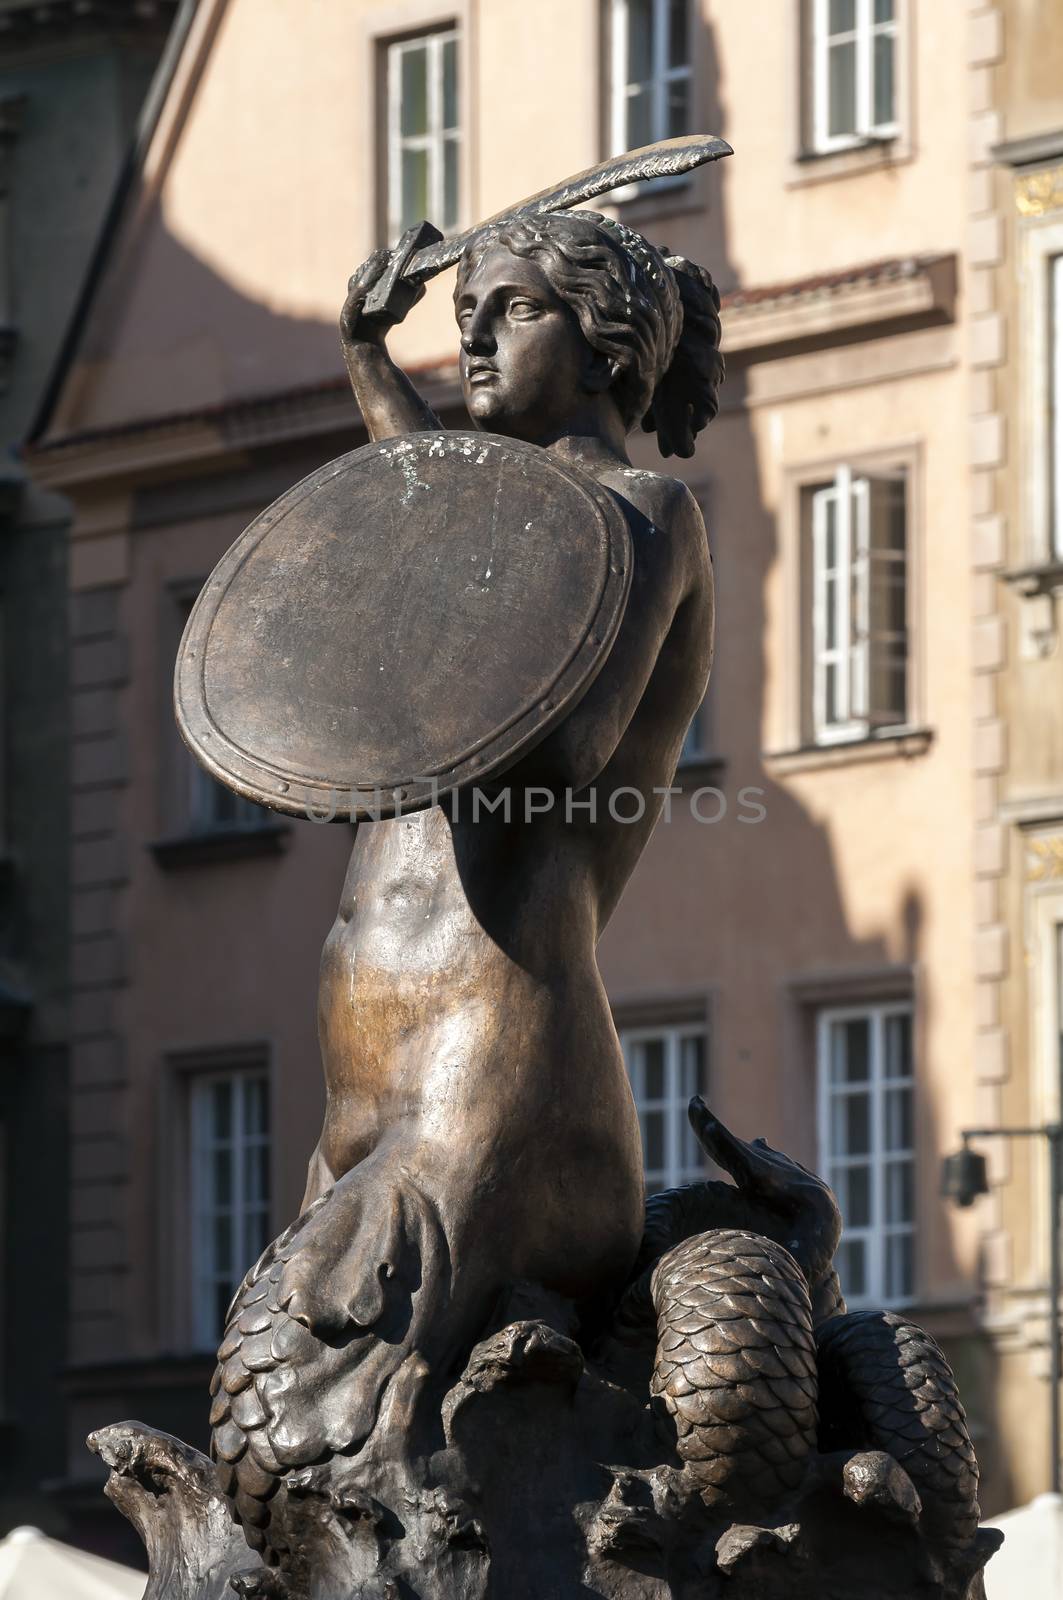 Mermaid statue in the Old Town Square of Warsaw, Poland.